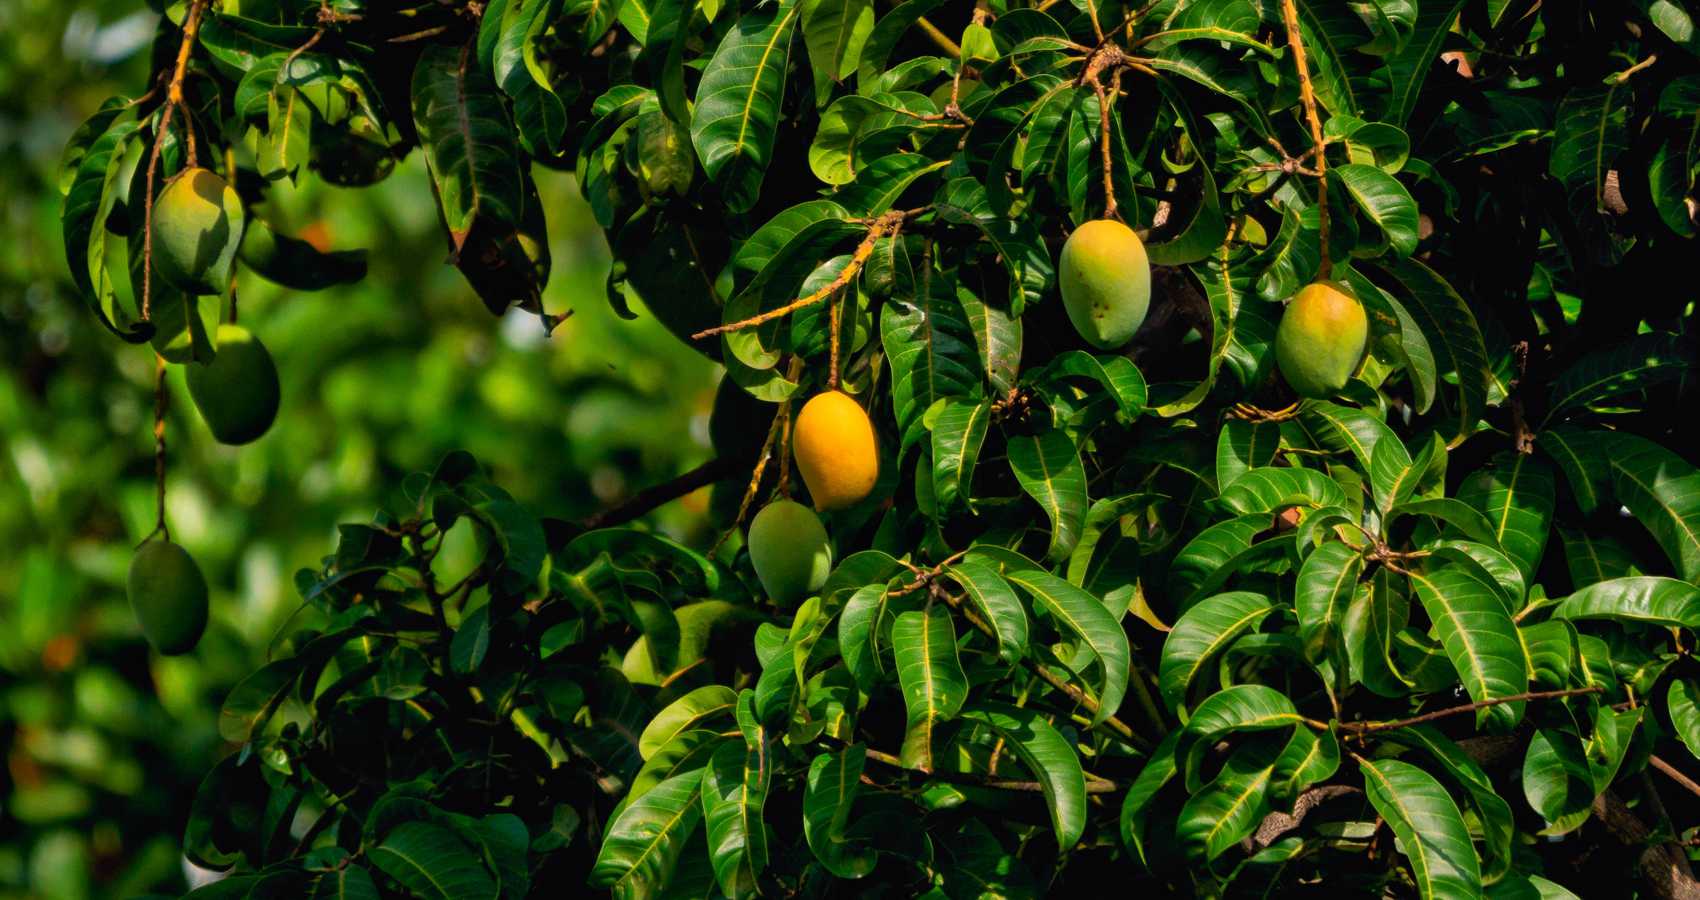 Mango Grove, poetry by Vipanjeet Kaur at Spillwords.com